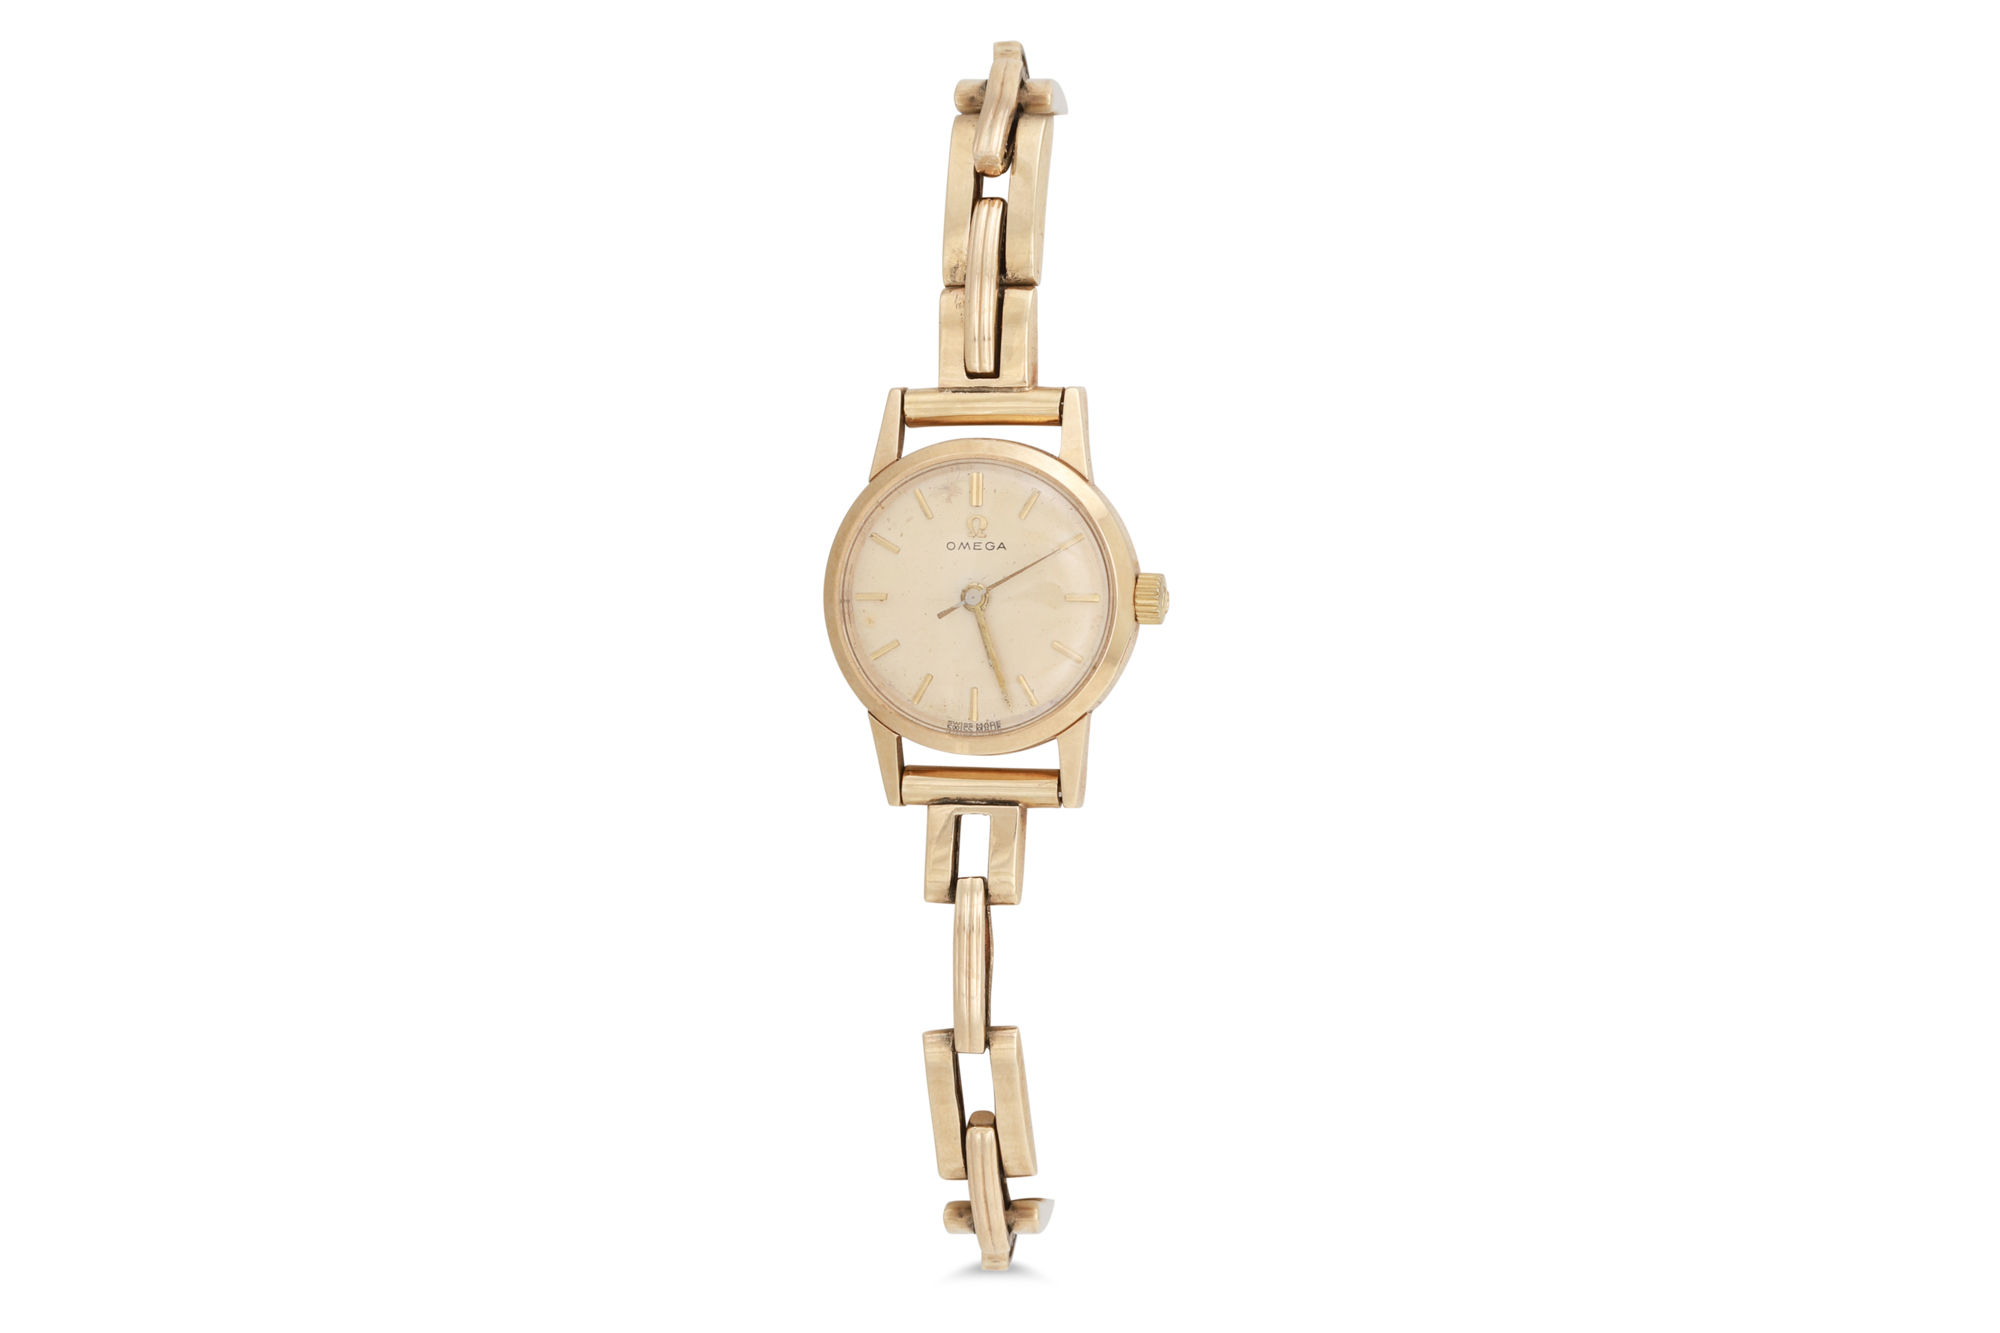 A 9CT GOLD OMEGA LADY'S WRISTWATCH, cocktail, champagne face with baton markers, expandable gold